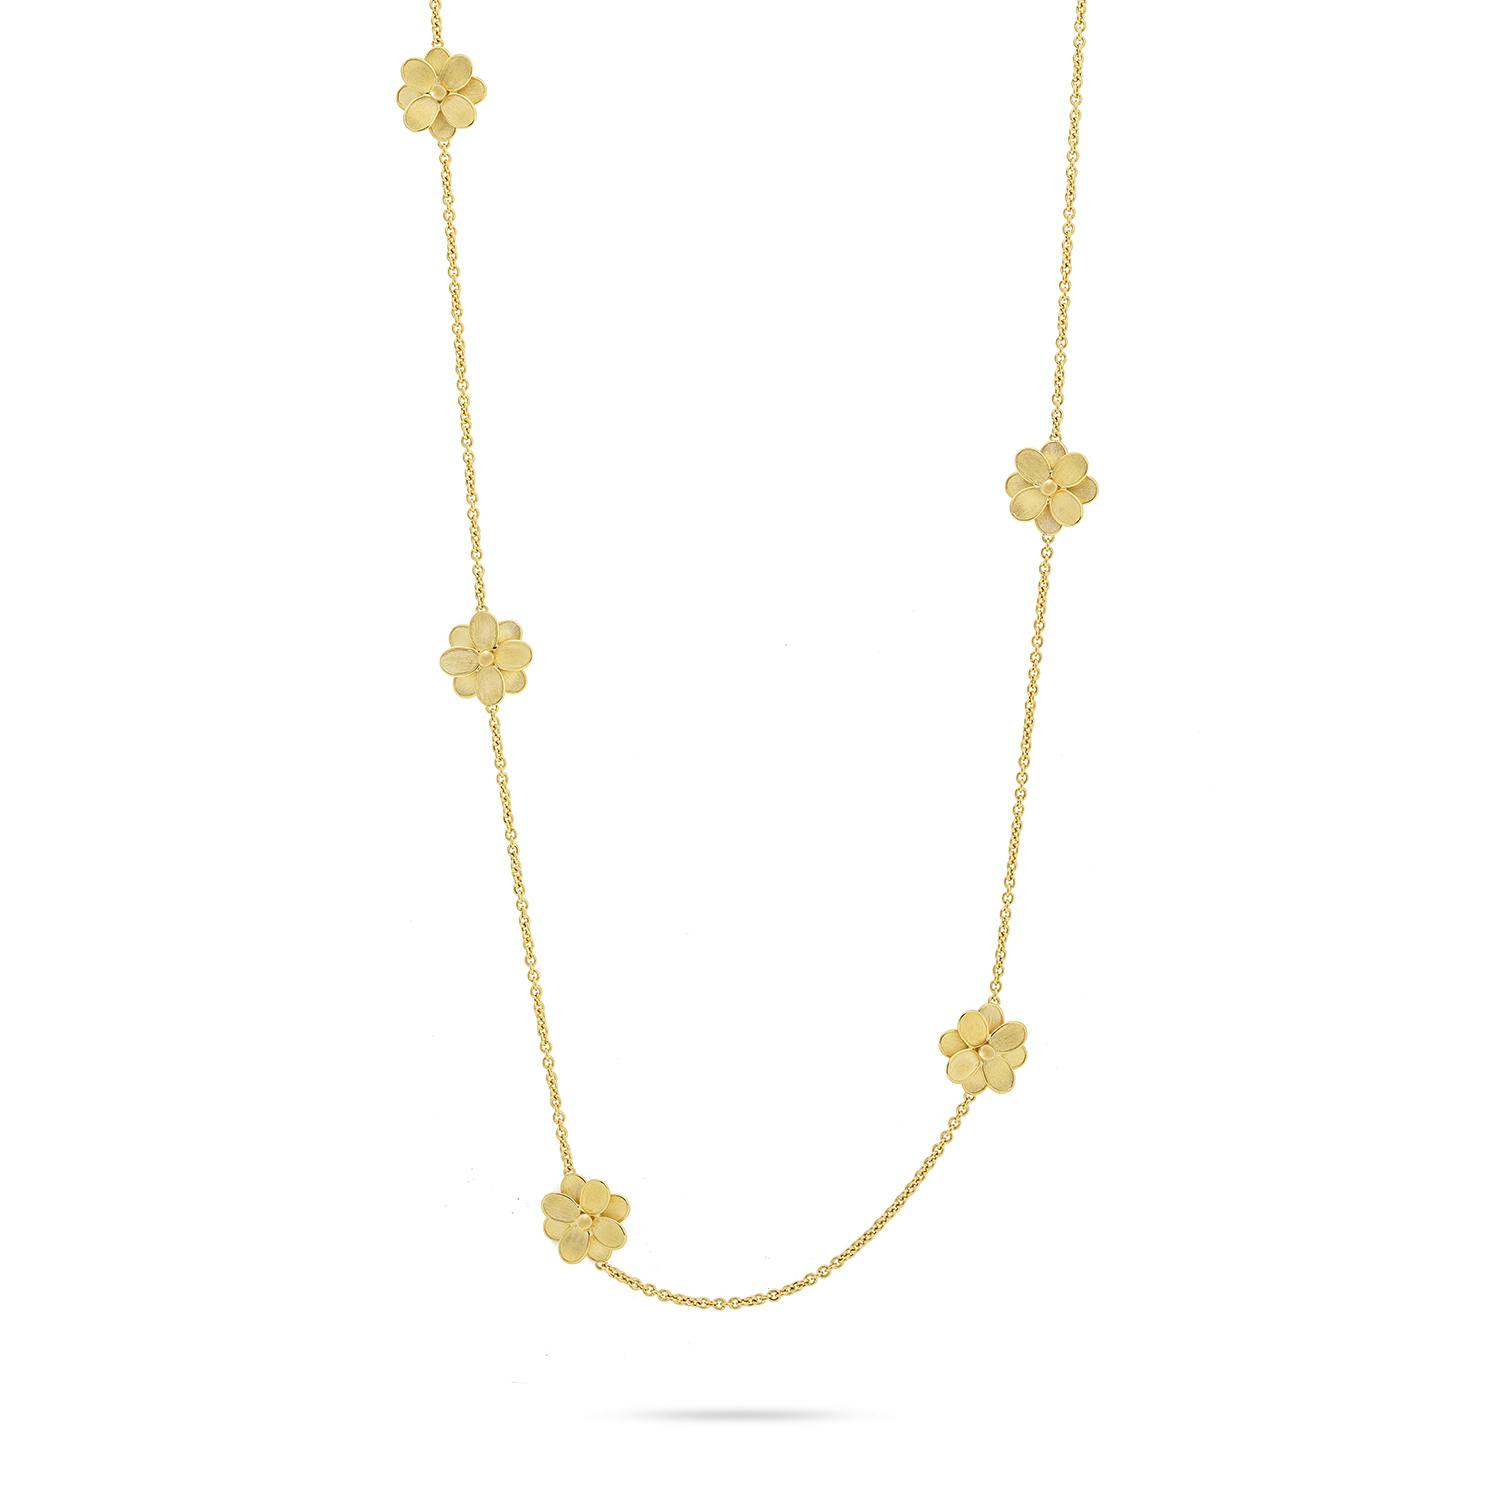 Marco Bicego Yellow Gold Lunaria Petali 36 inch Flower Station Necklace